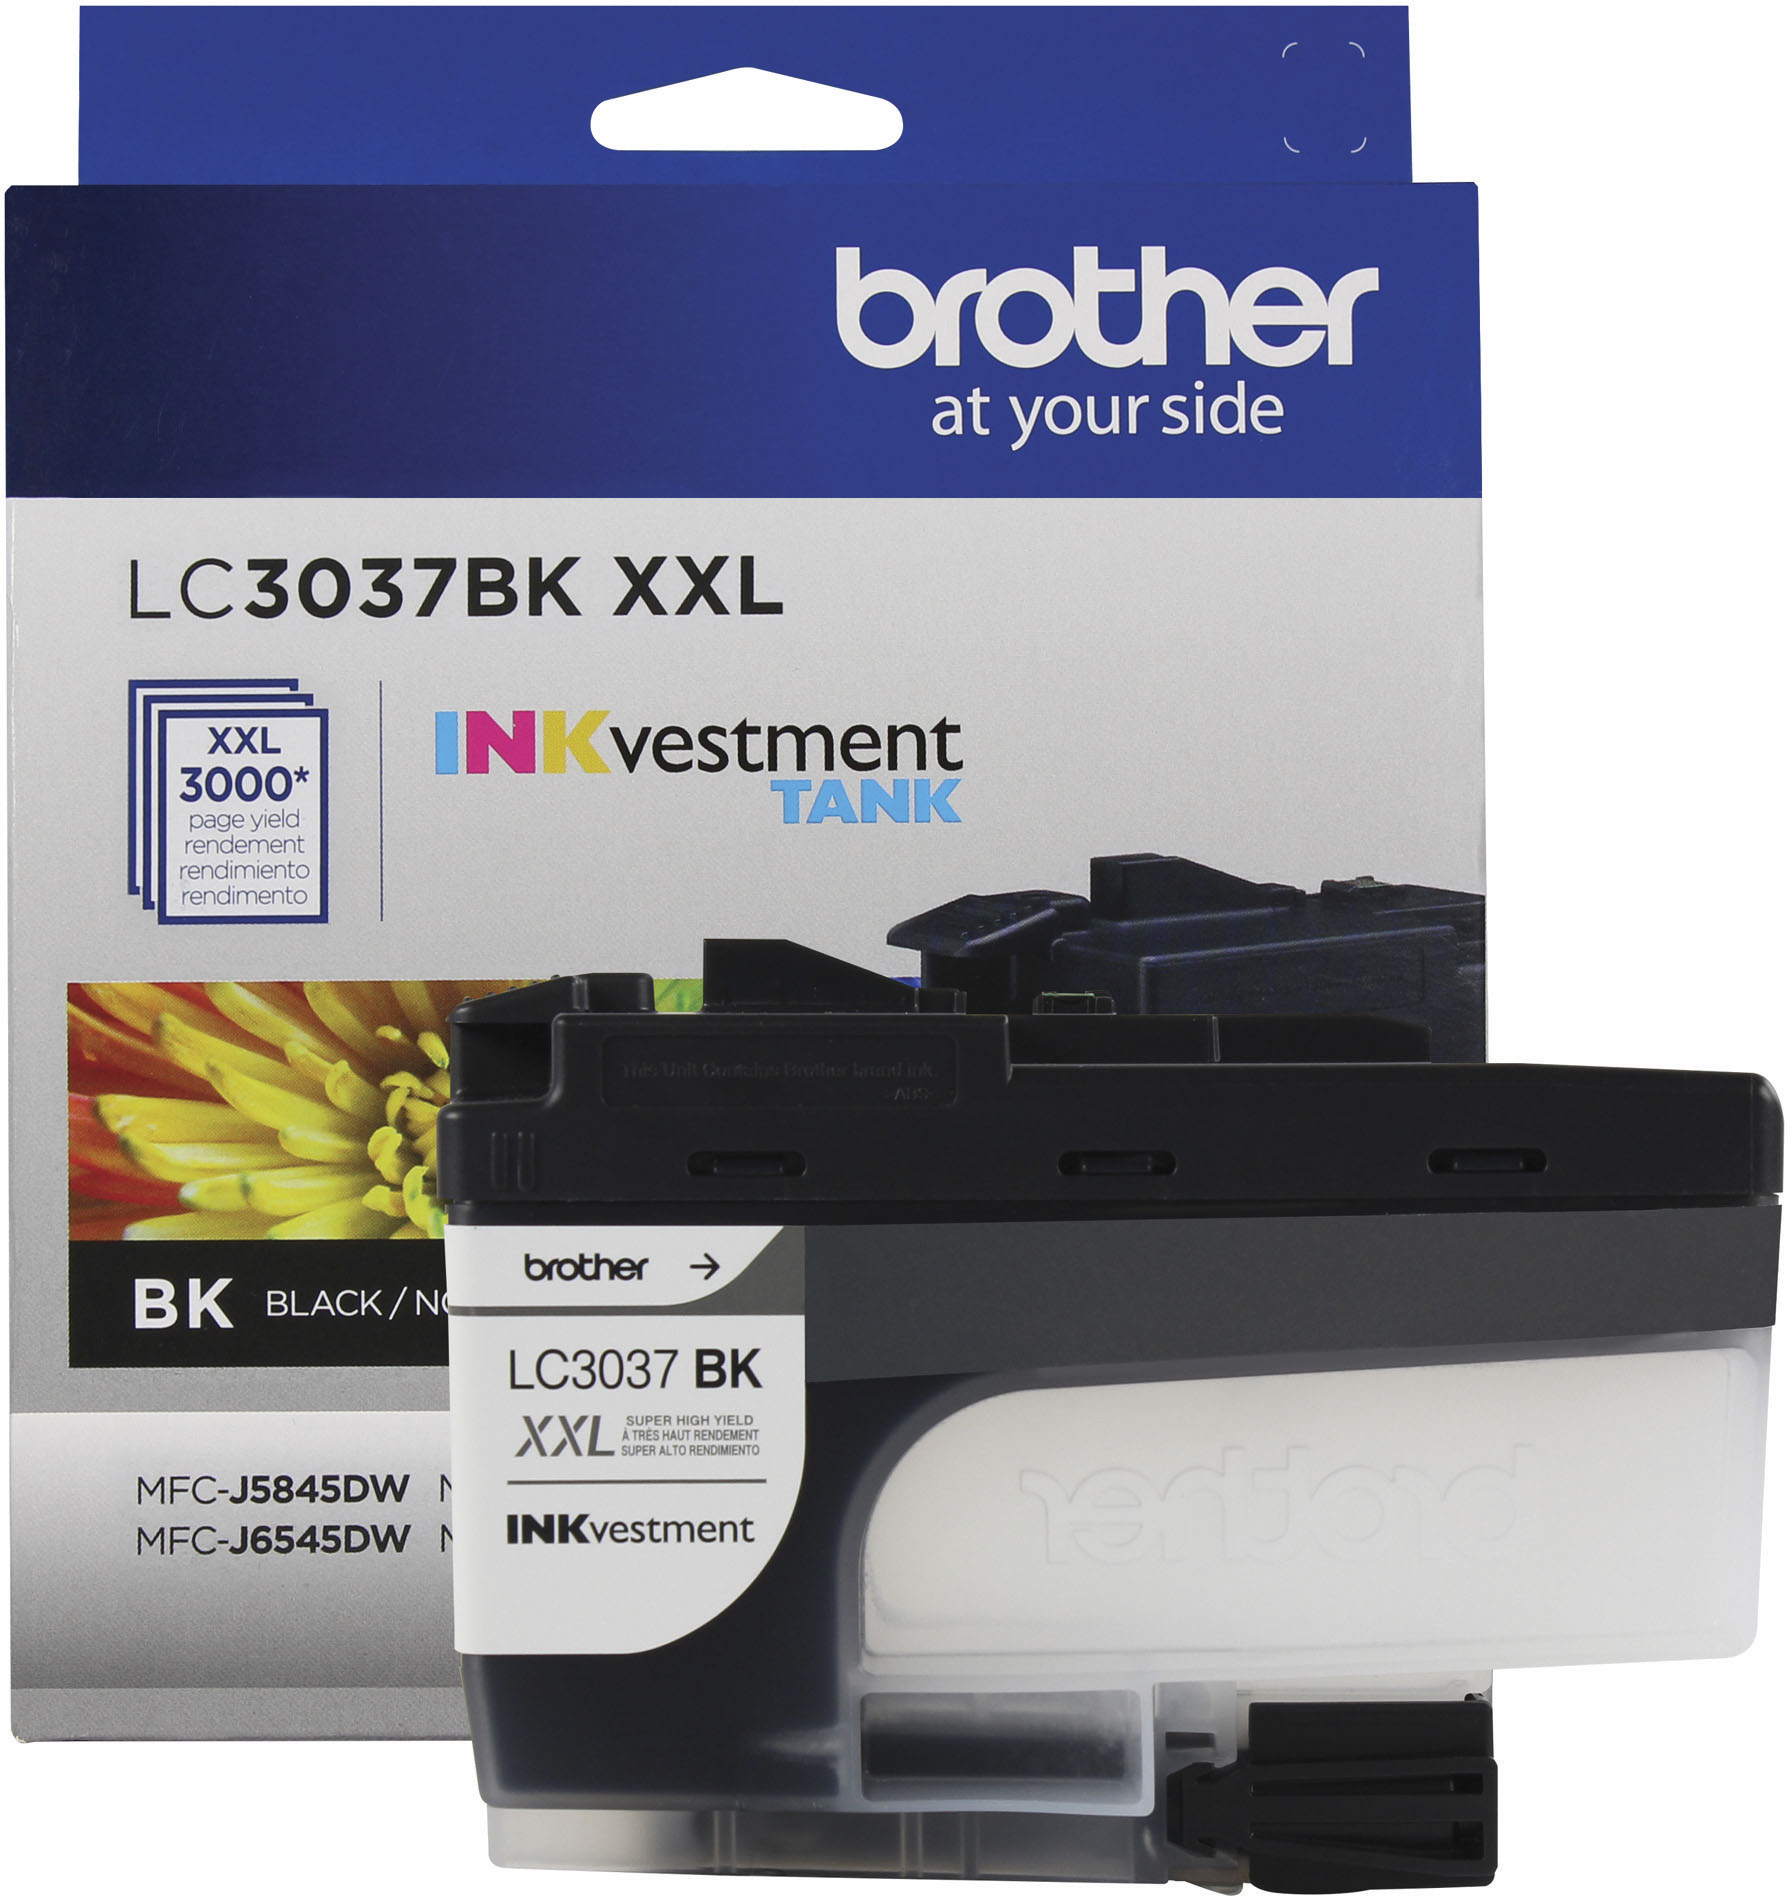 Brother - LC3037BK Super High-yield INKvestment Tank Ink Cartridge - Black